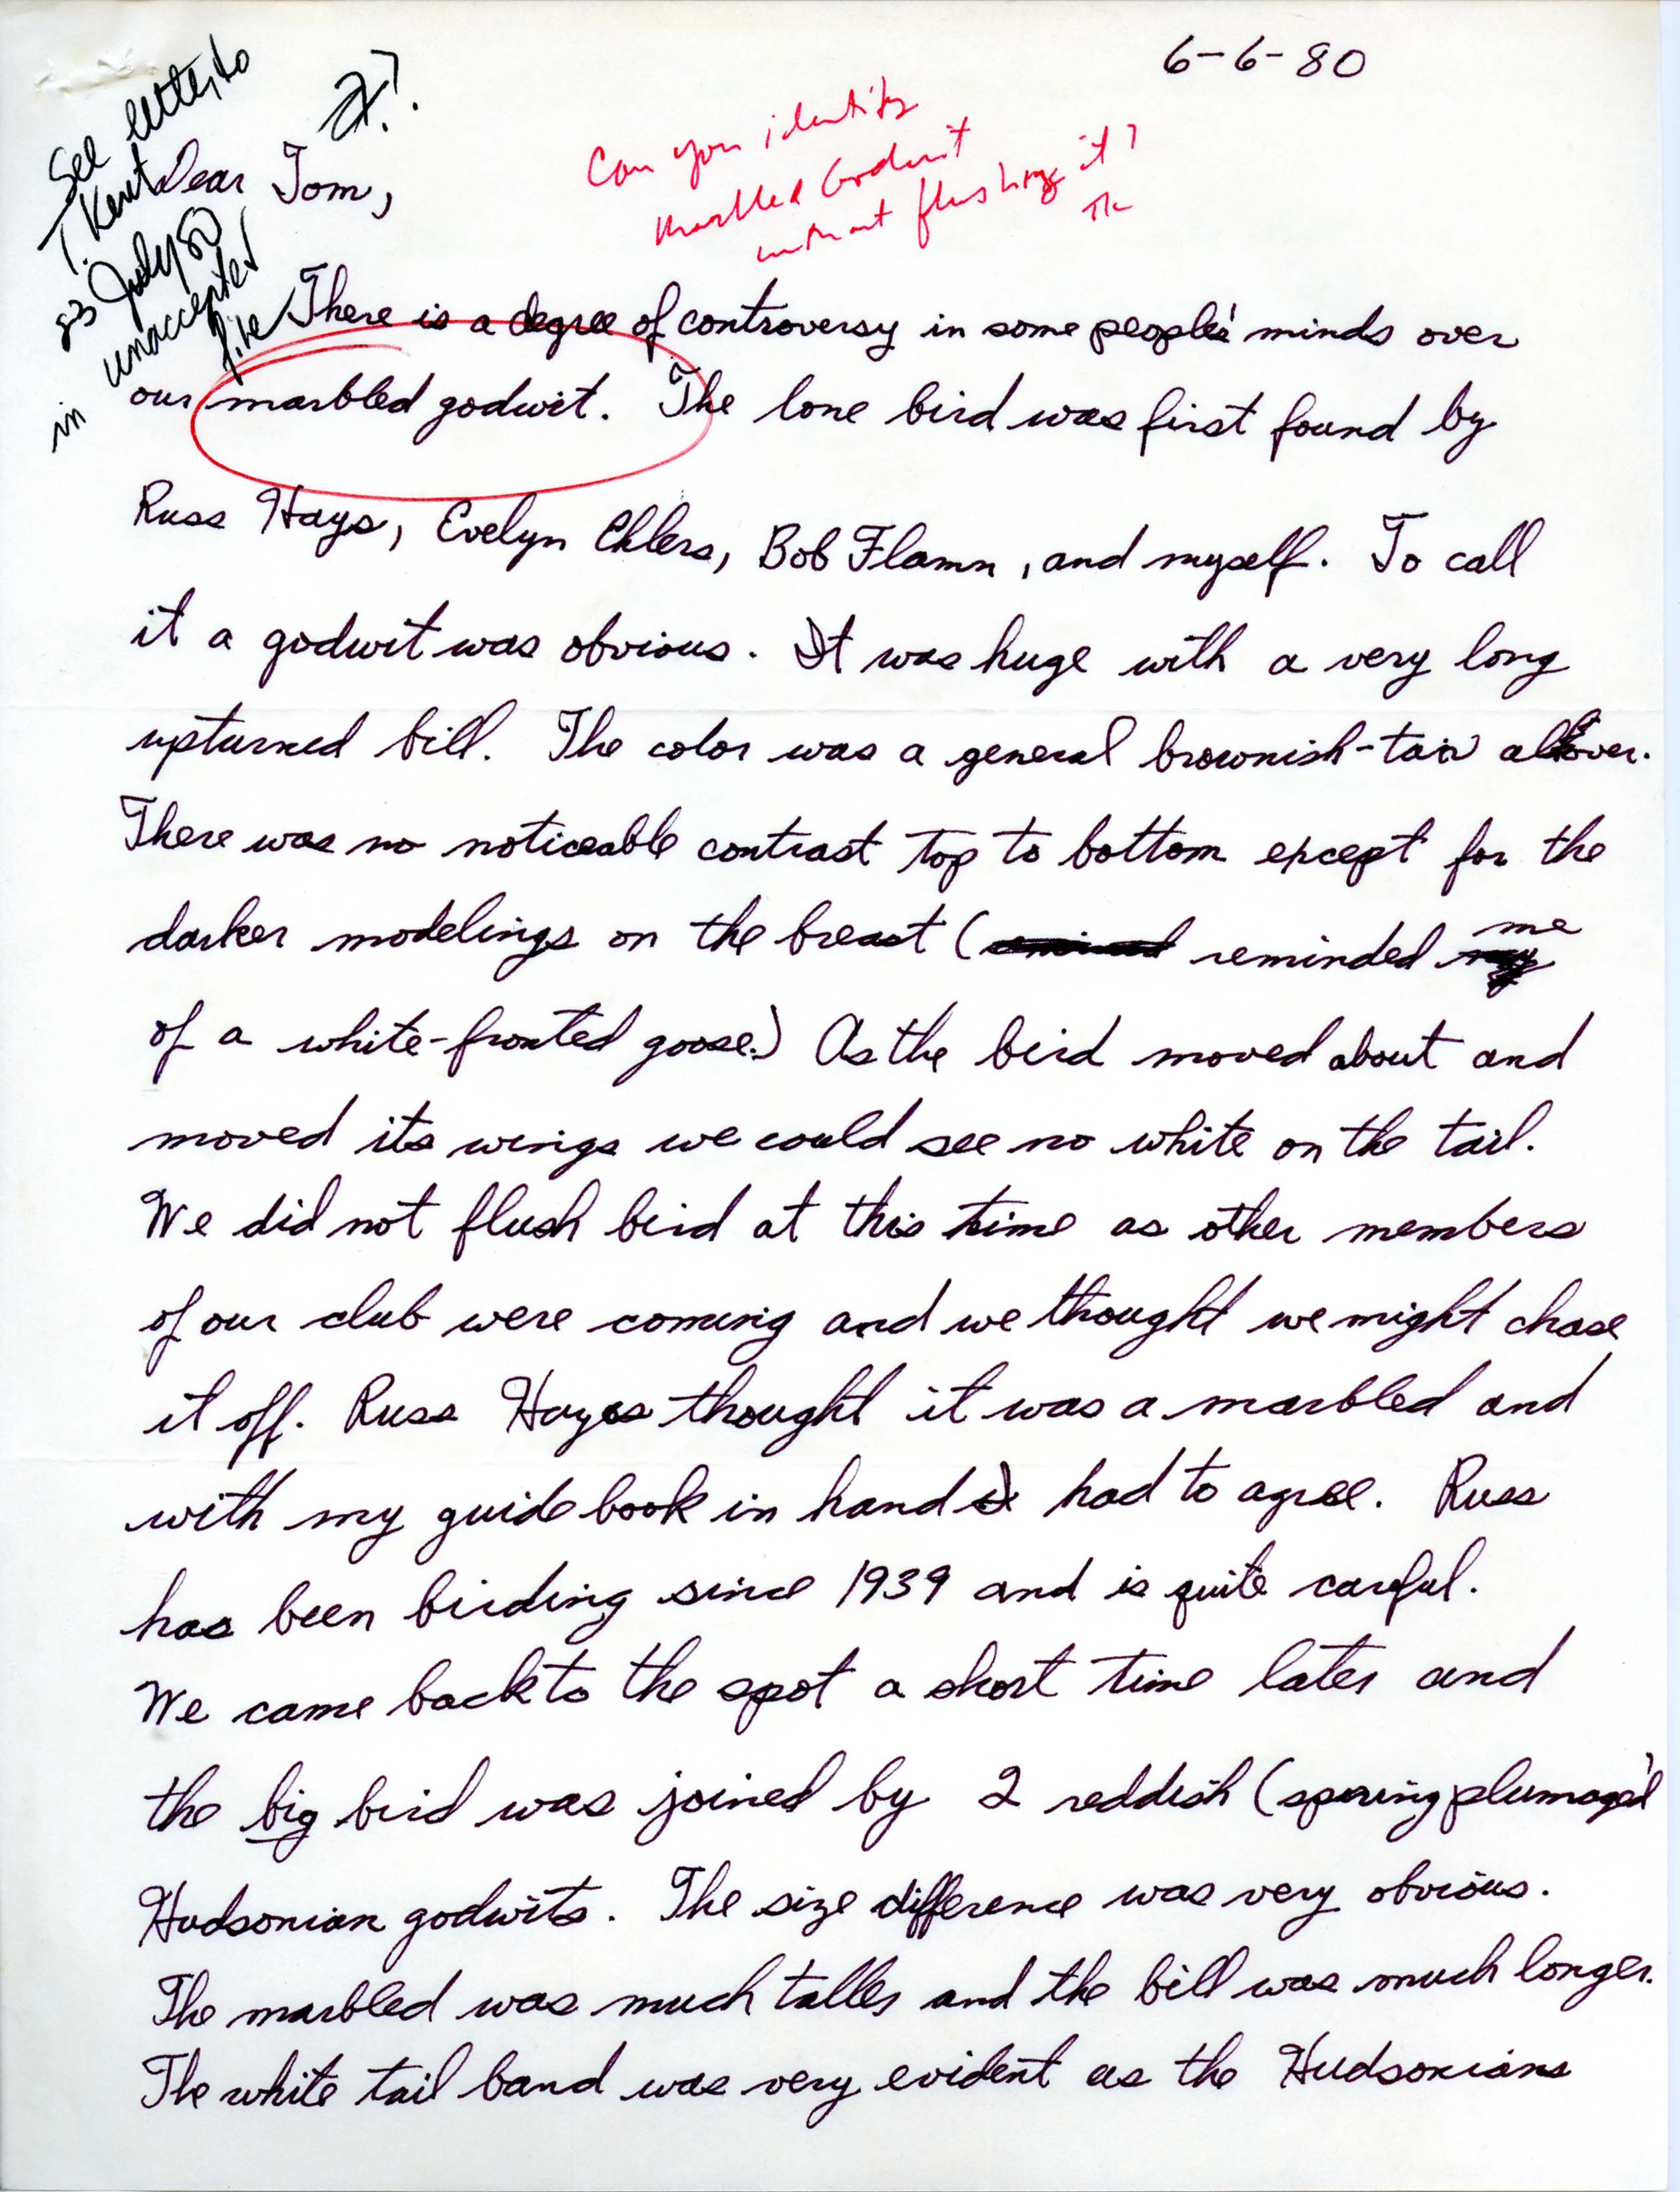 Robert K. Myers letter to Thomas H. Kent about bird sightings including Marbled Goldwit, June 6, 1980